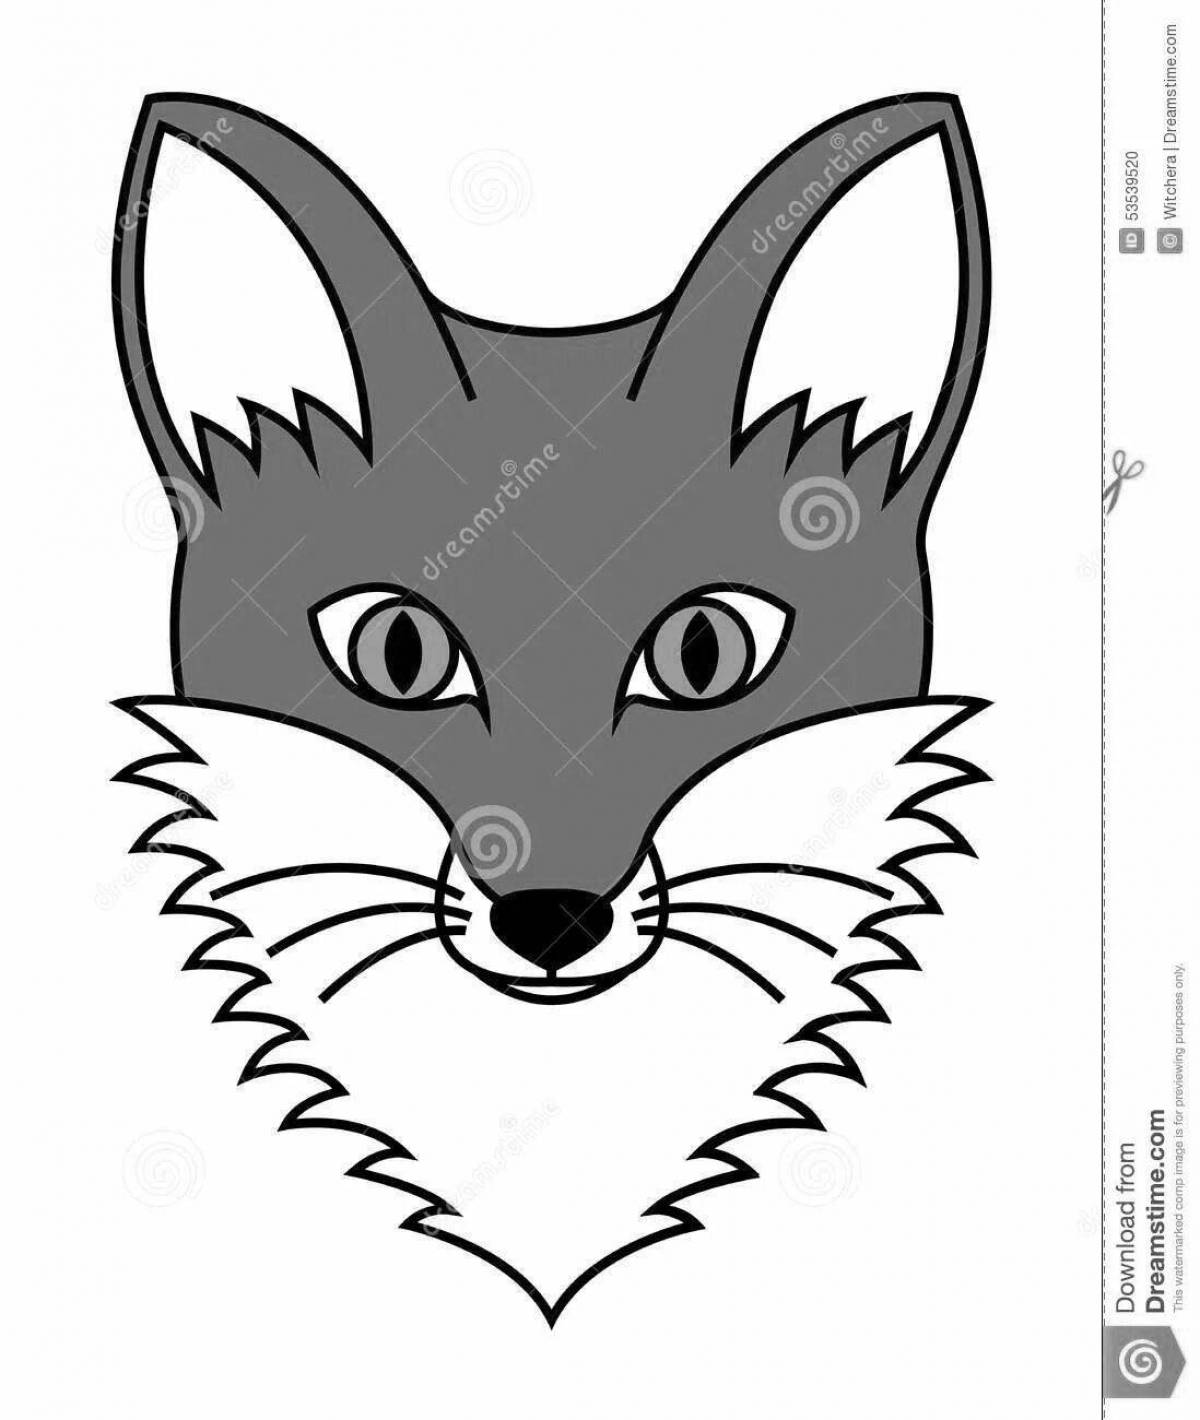 Adorable fox face coloring page